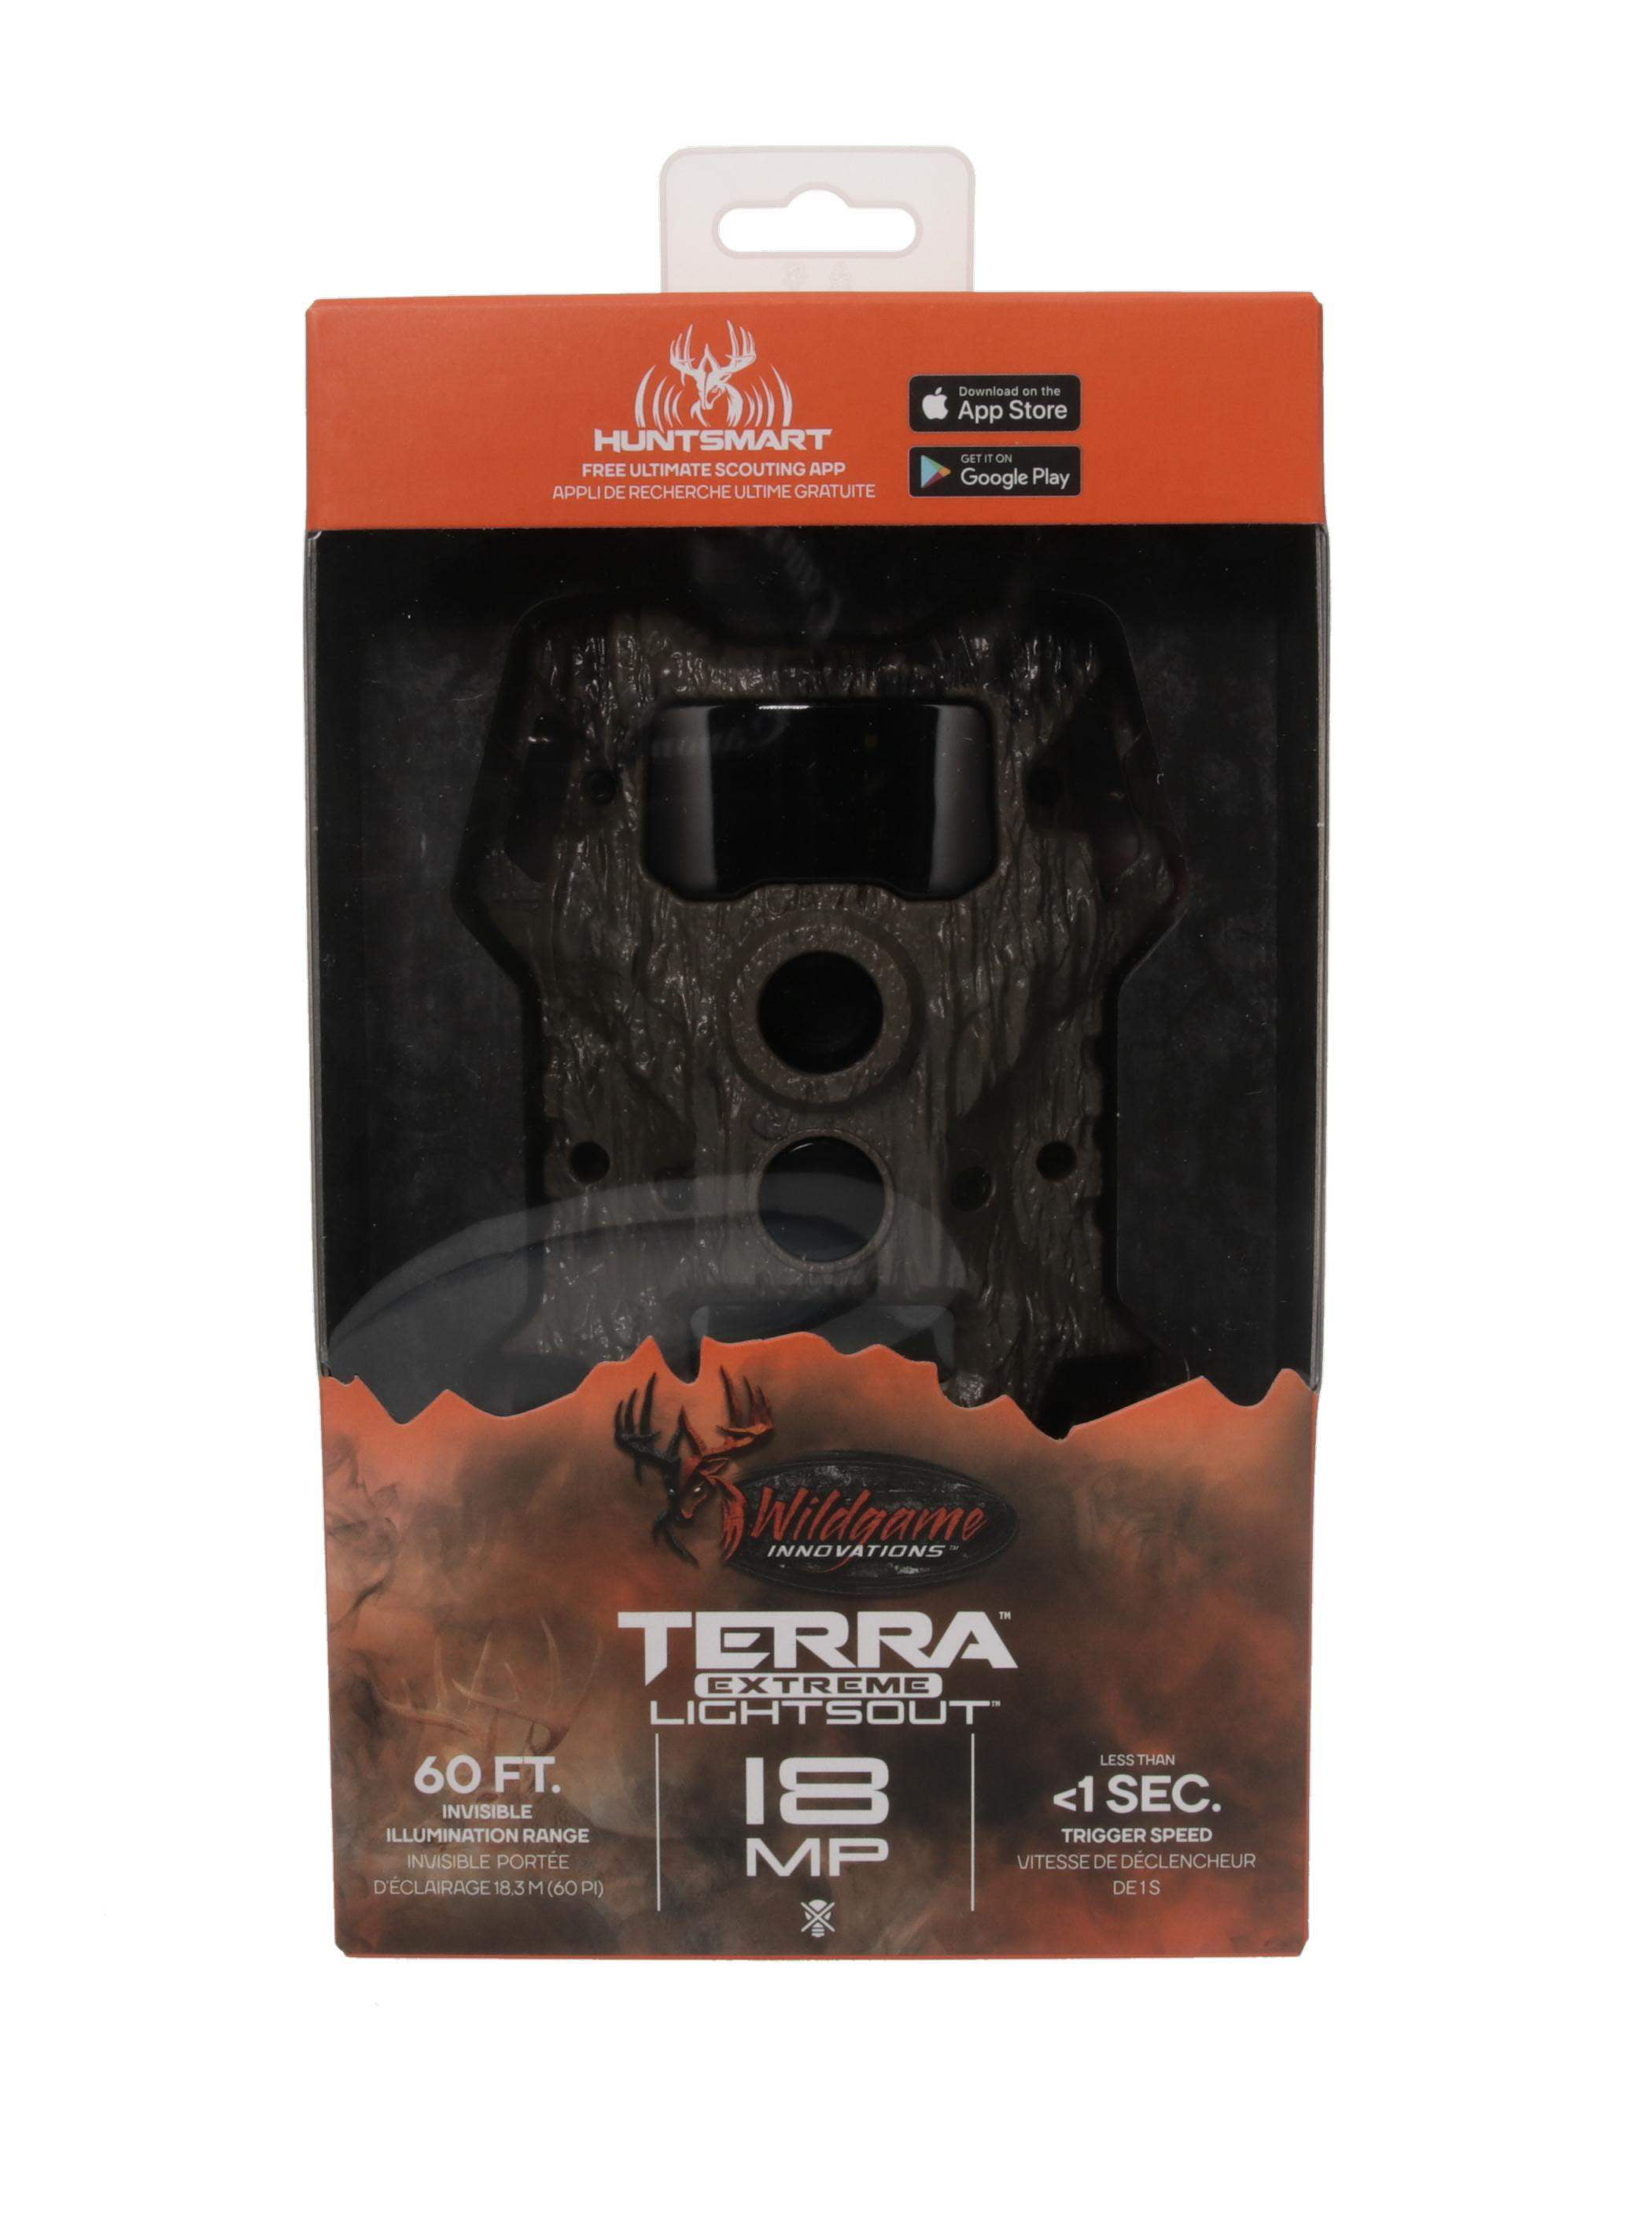 Terra Extreme 14MP Trail Camera Wildgame TX14i8D-9 